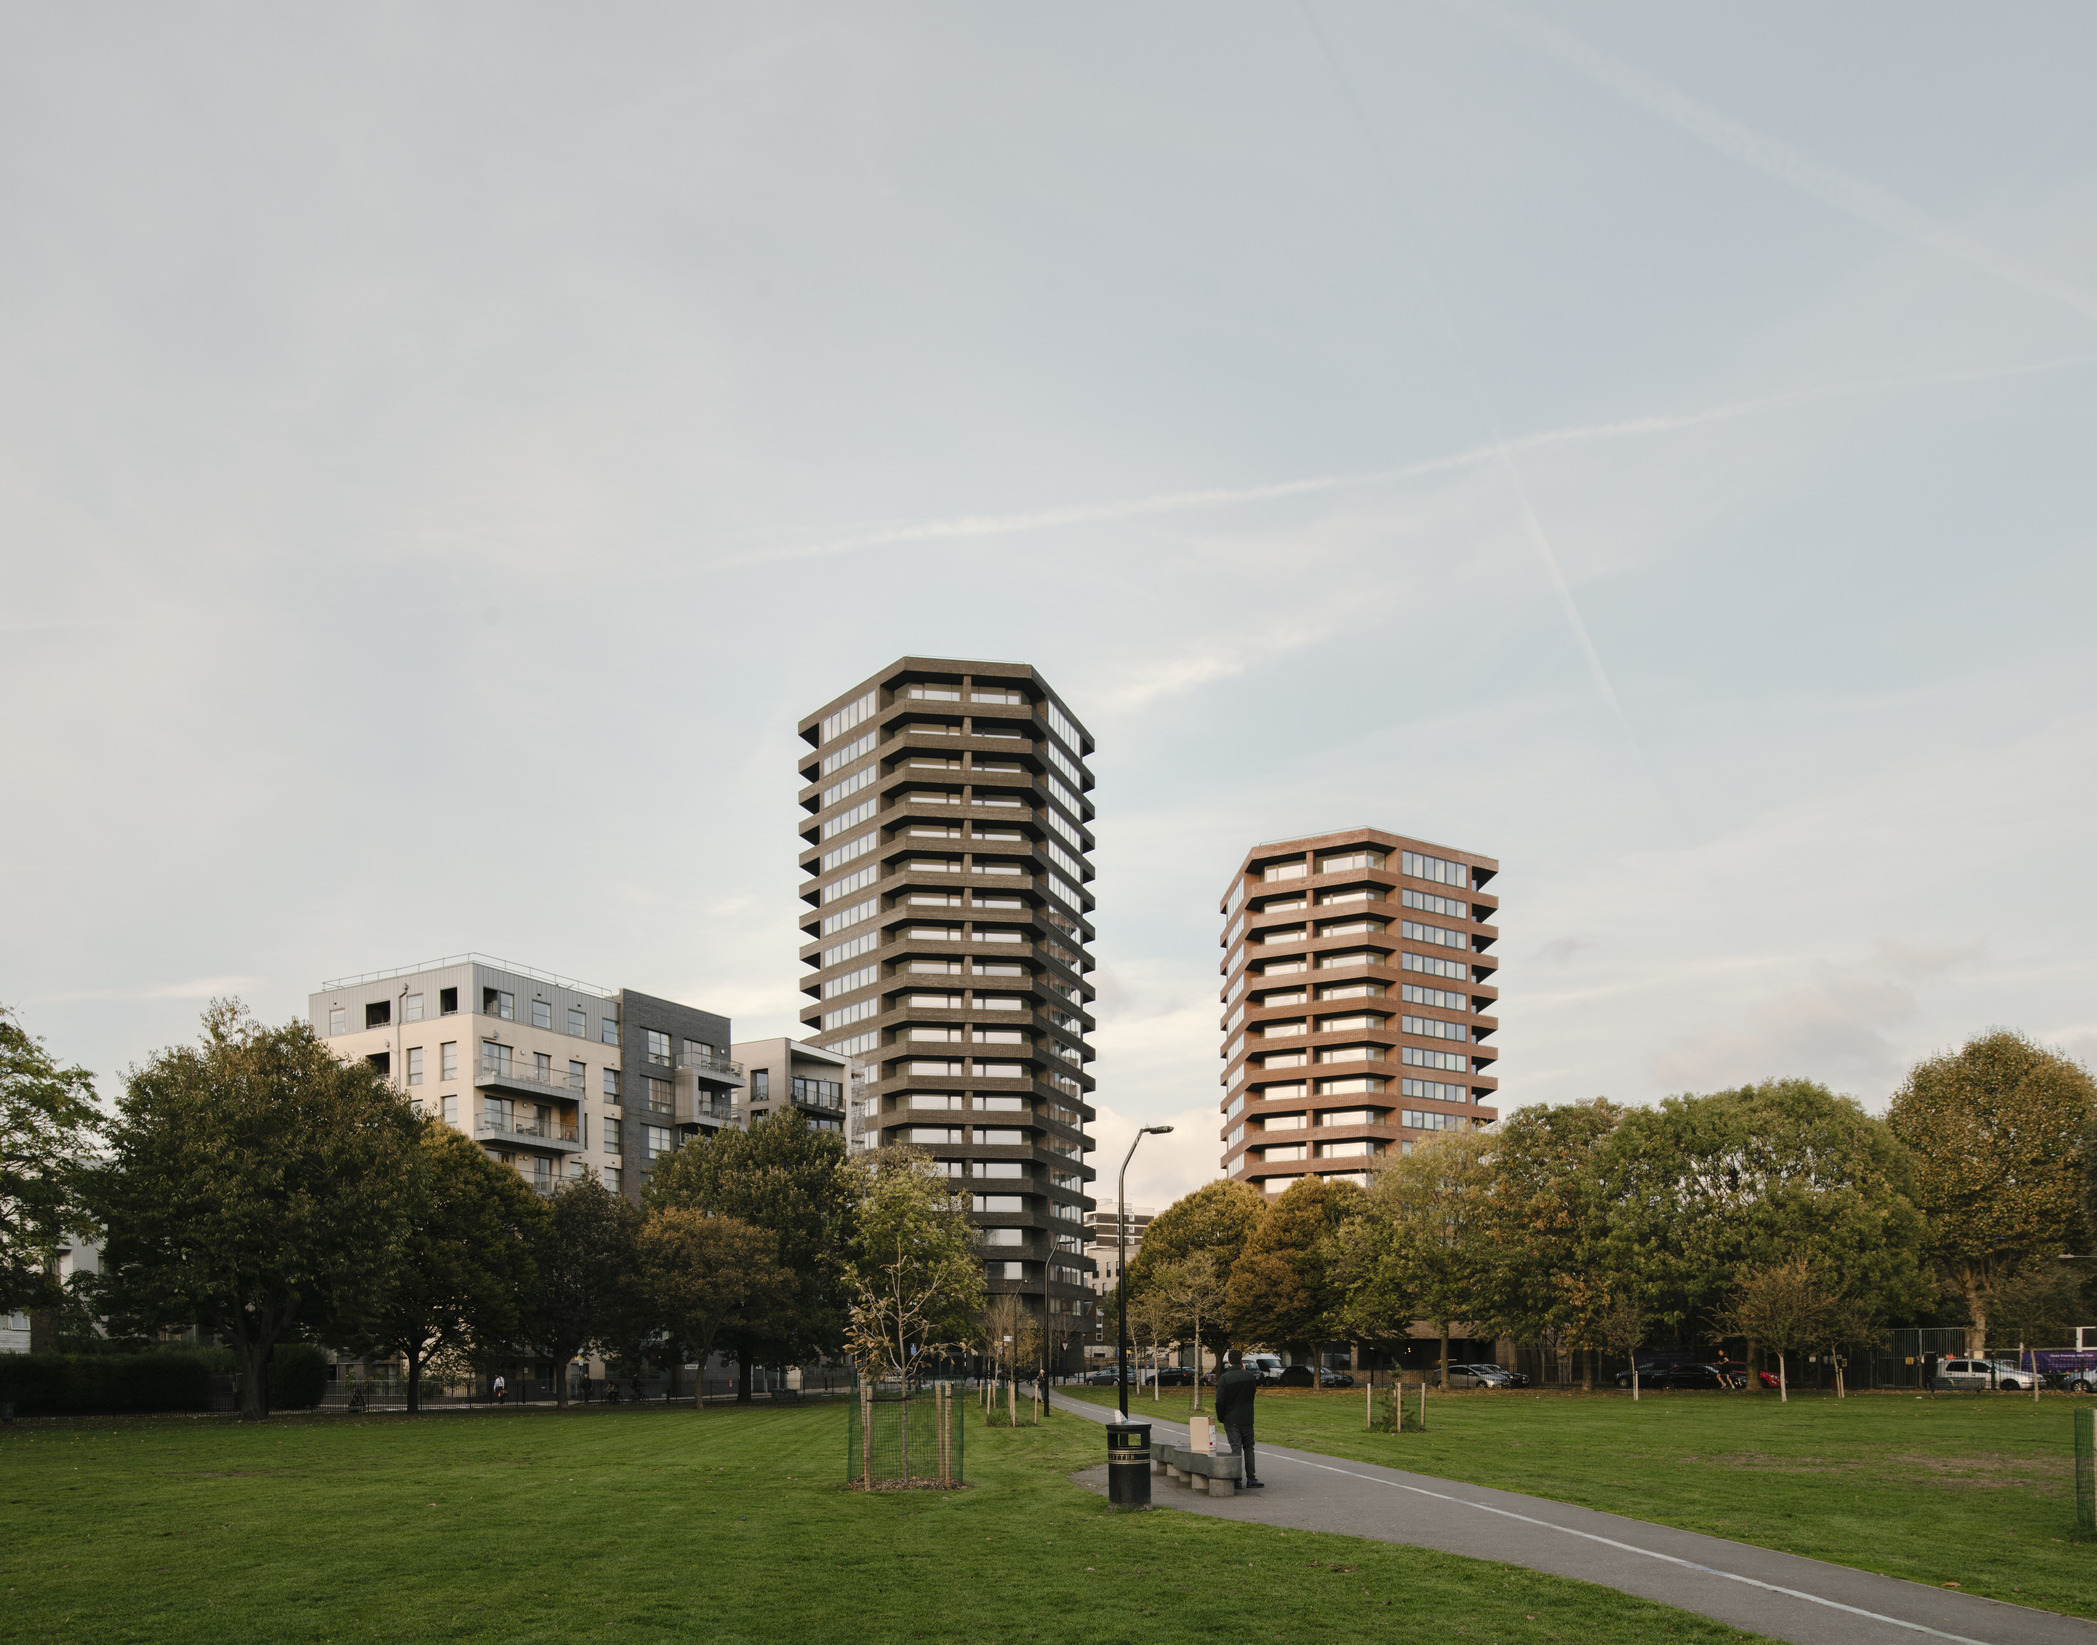 Two medium rise residential towers, one red and the other grey, overlook a tree-filled park.